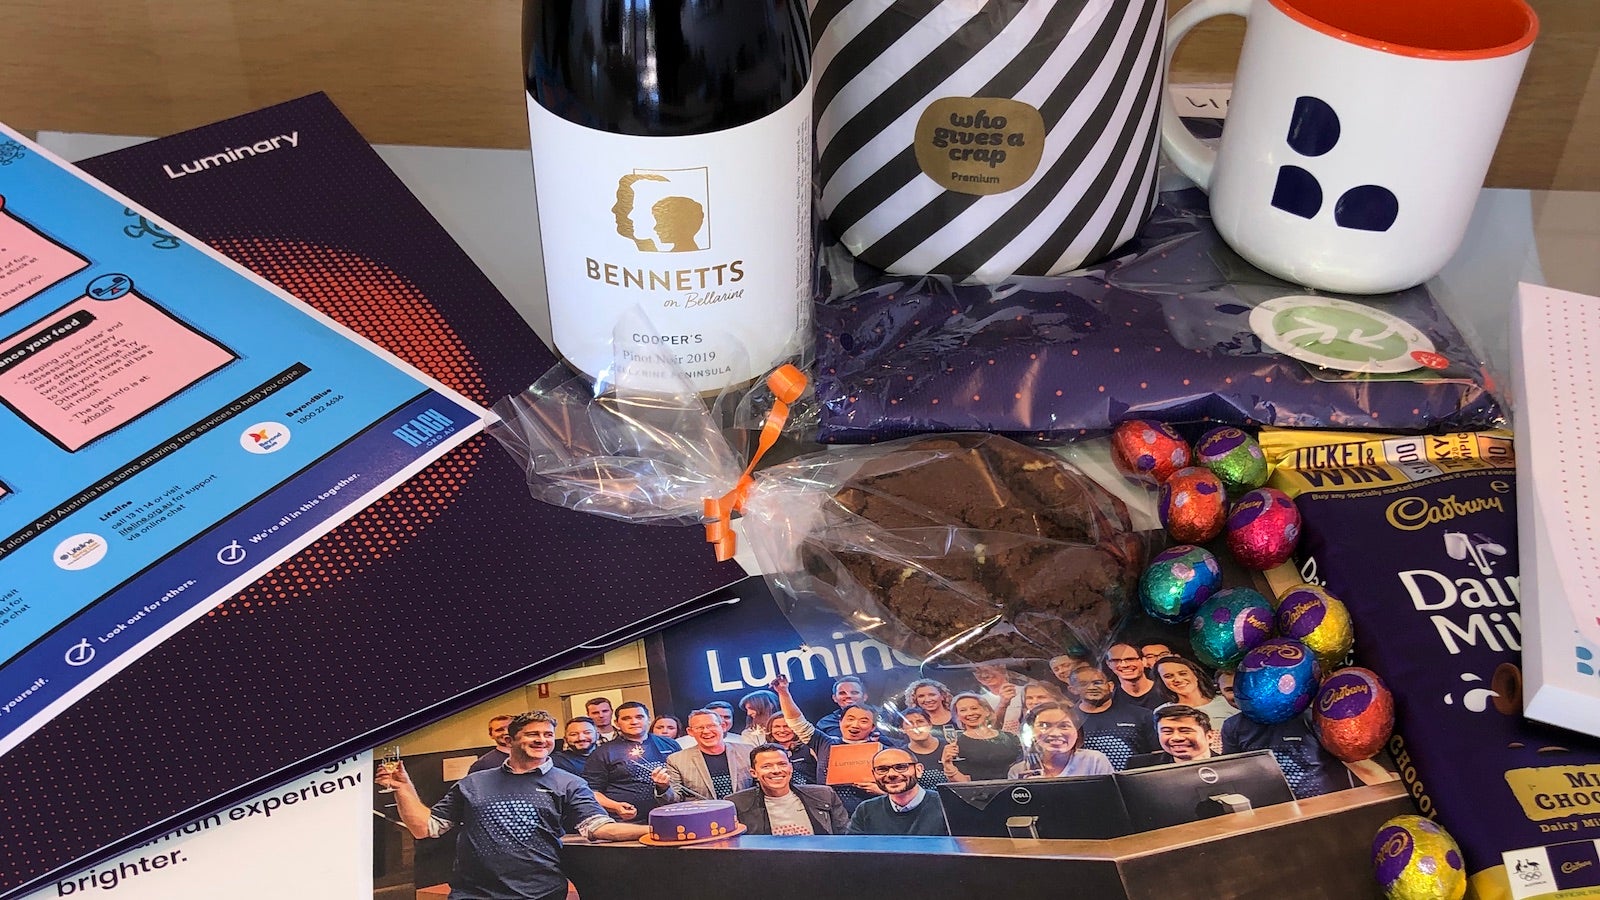 Care pack sent to Luminary staff, featuring chocolates, coffee cup, wine, notepad, values statement, toilet paper and mental health guidance sheet.